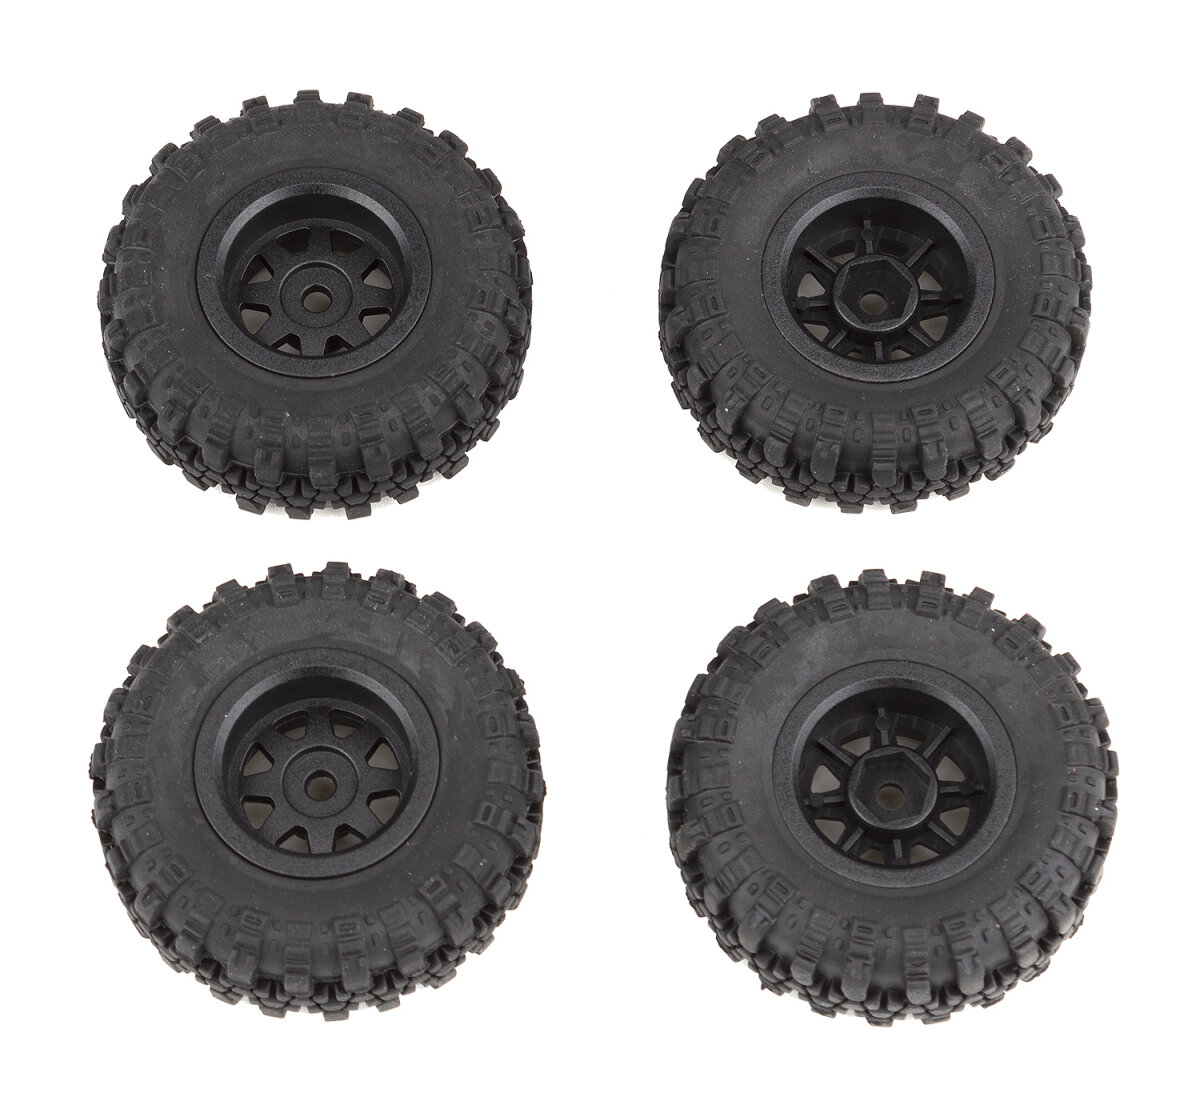 Element RC 21708 Enduro24 wheels and tires, mounted